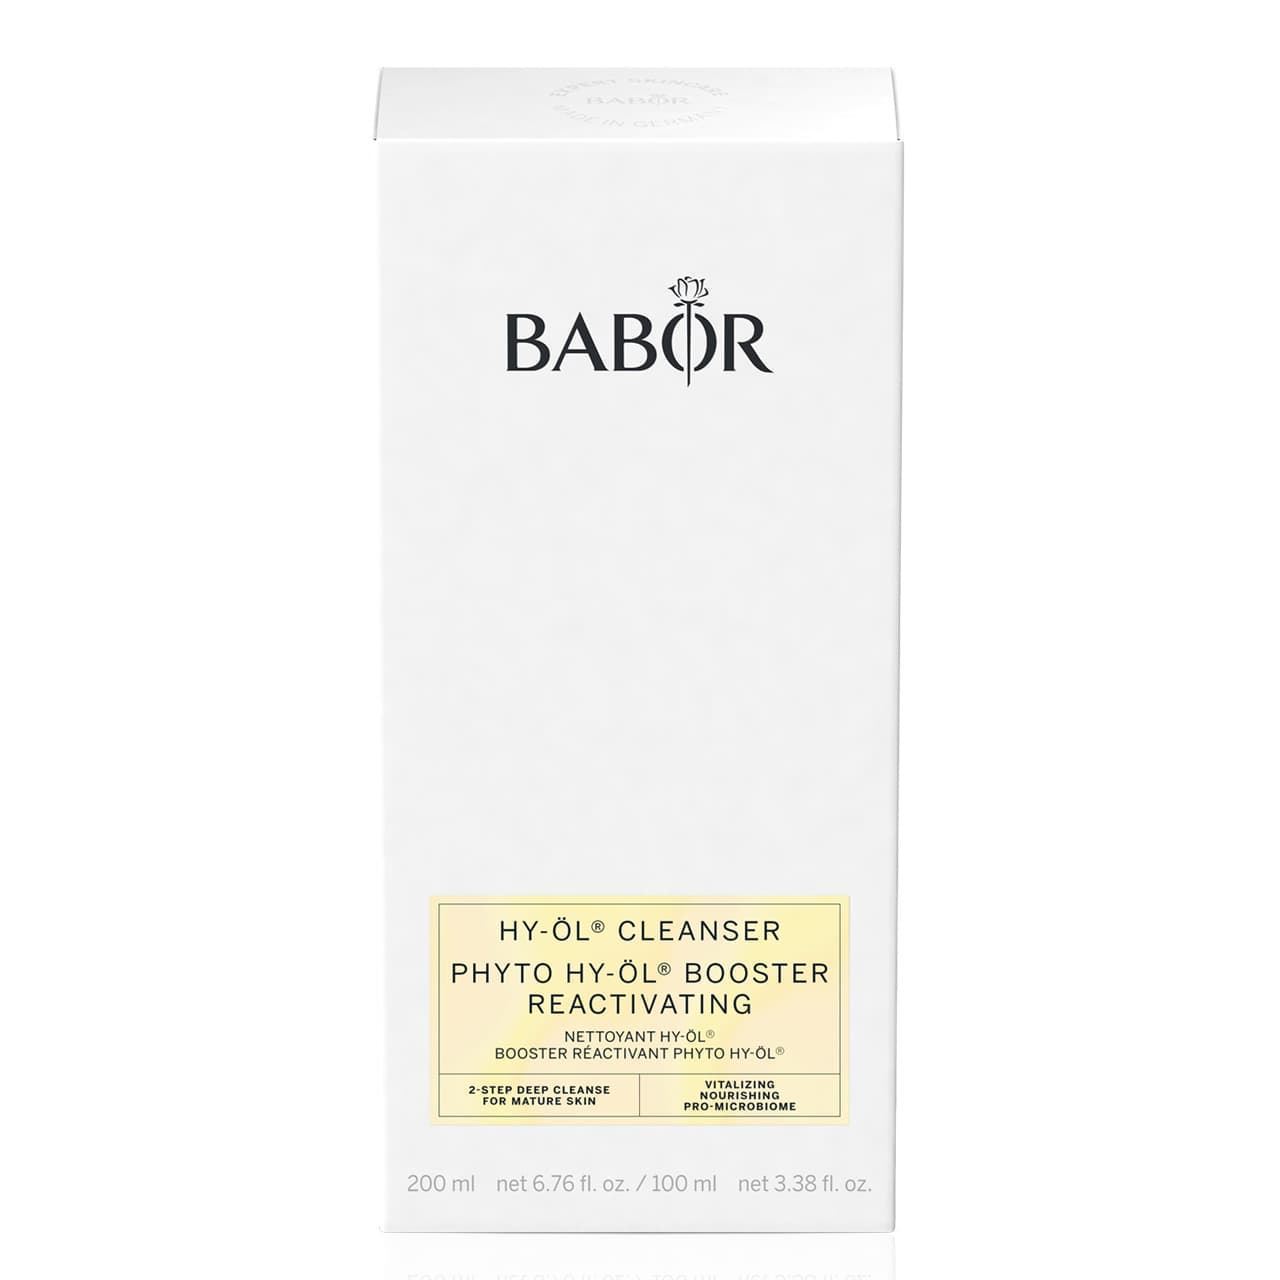 BABOR DUO : HY-ÖL CLEANSER & PHYTO HY-ÖL BOOSTER REACTIVATING SET - Imagen 2